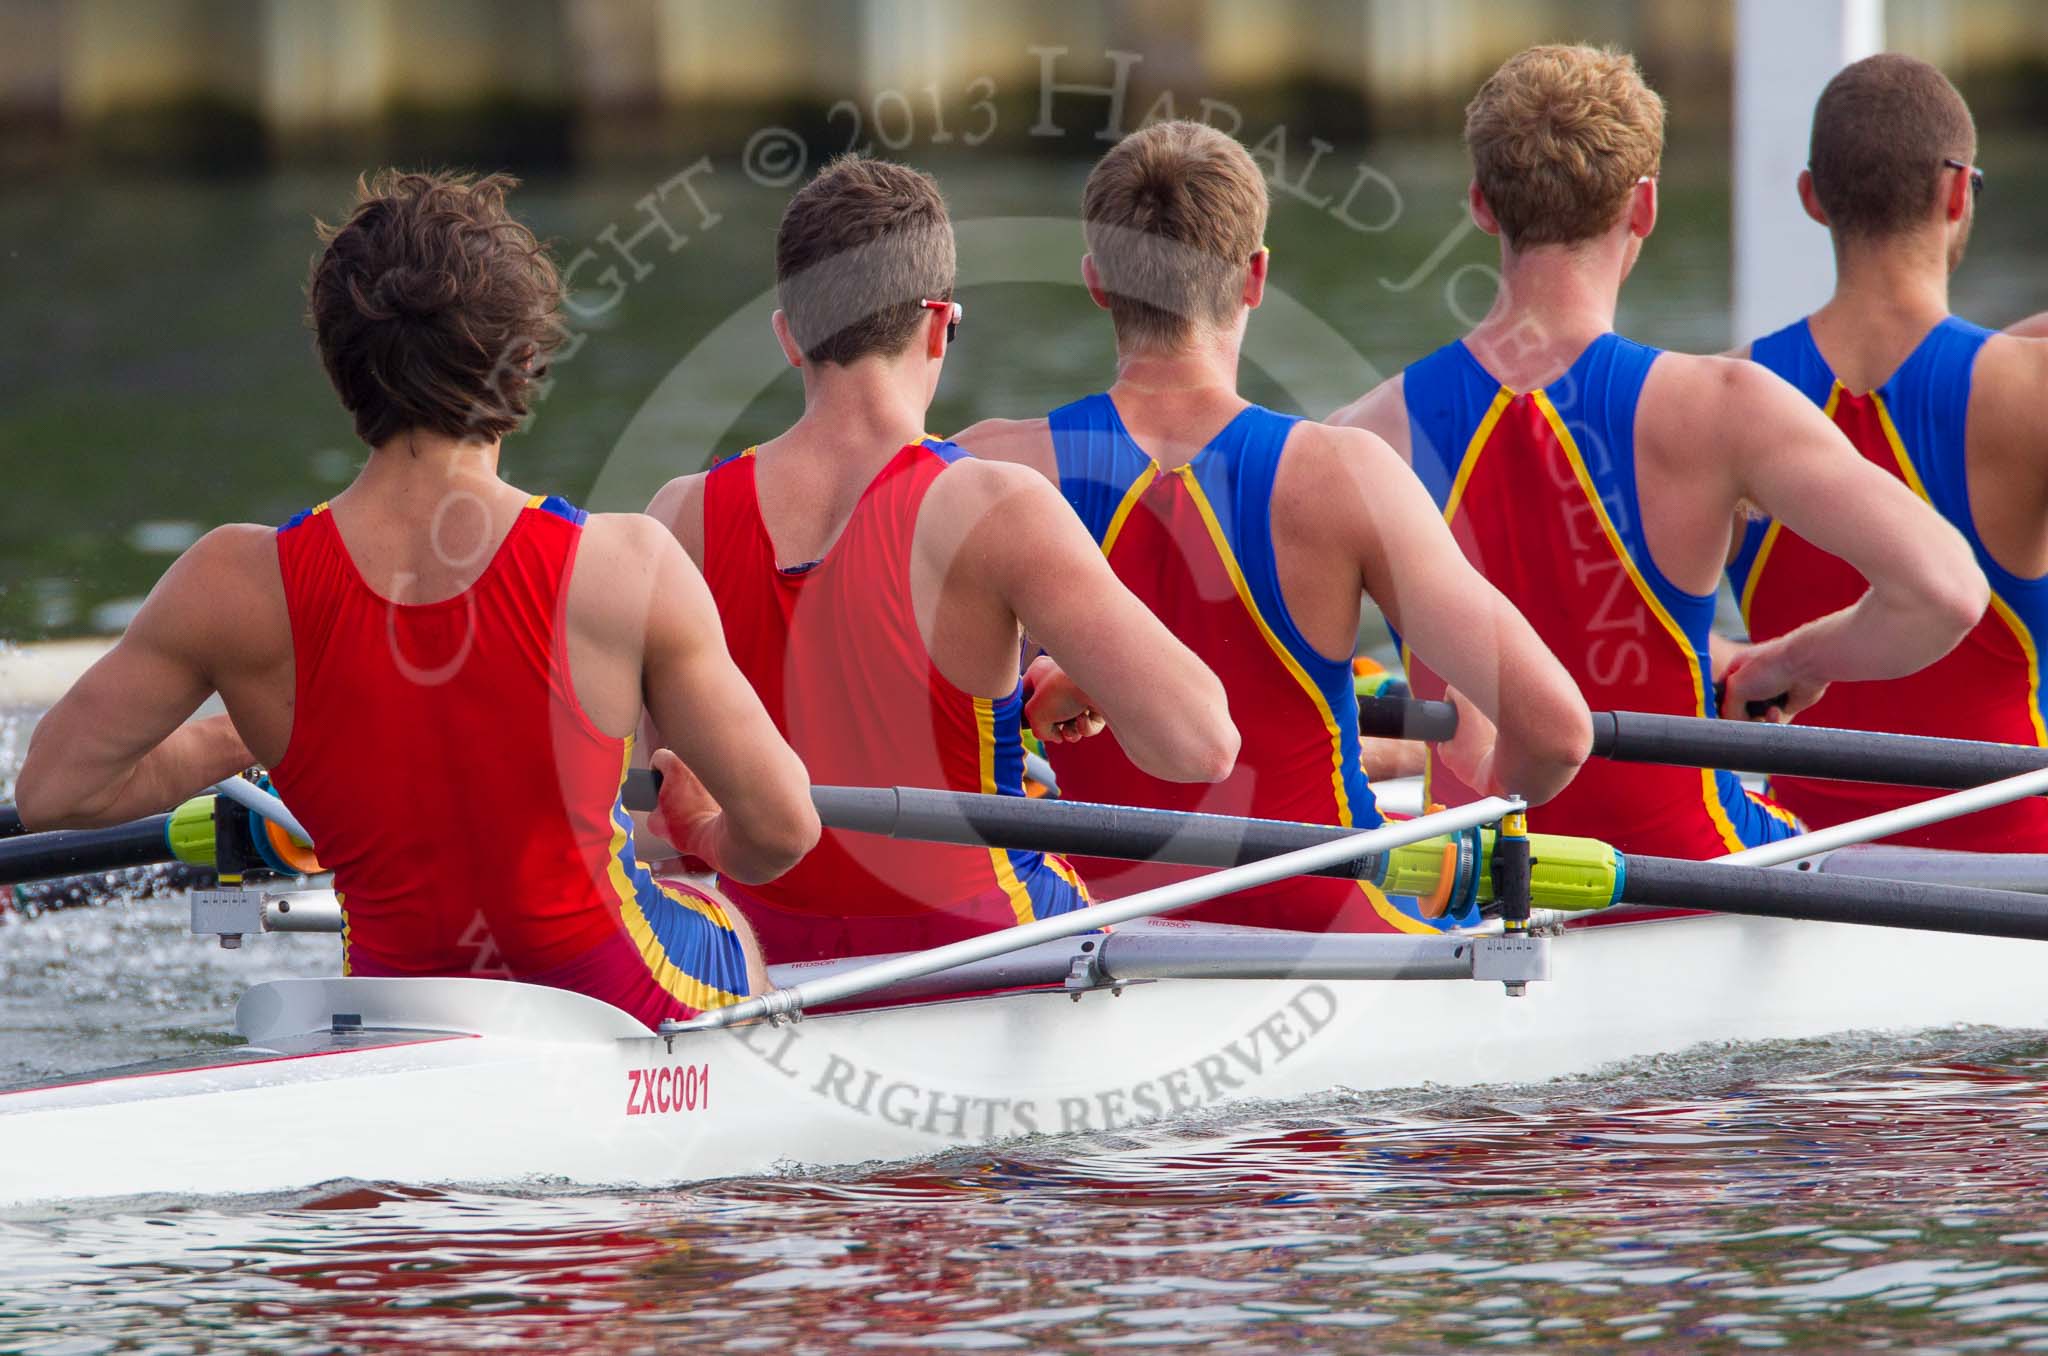 Henley Royal Regatta 2013, Saturday: The Scotch College Eight, from Melbourne, Australia, during a training session in the morning. Image #8, 06 July 2013 08:37 River Thames, Henley on Thames, UK